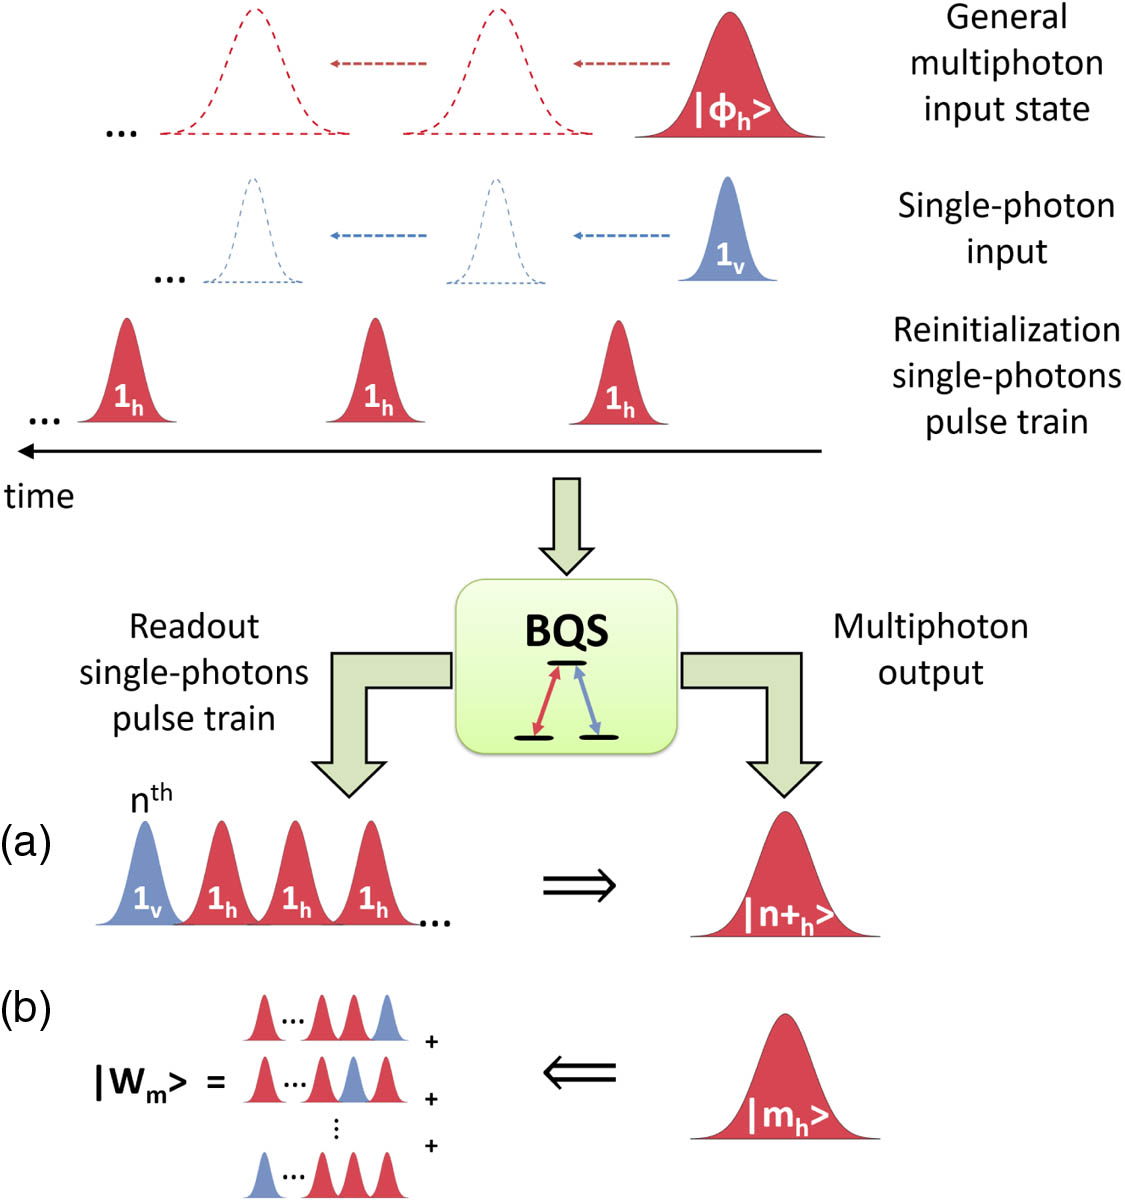 Bright quantum scissors (BQS) multi-step protocol. The protocol uses three input channels: a general H-polarized multi-photon quantum state, a V-polarized single photon, and a train of H-polarized single photons. The multi-photon pulse and the V-polarized single-photon pulse interact with the Λ system simultaneously and the resulting pulses are fed back to the system repeatedly. The H-polarized single-photon pulses are interleaved with the multi-photon pulse evolutions and reinitialize the state of the Λ system at every iteration. At the output channels of the protocol we get a train of readout single-photon pulses and a modified multi-photon state. (a) Heralded on the measurement of the nth readout photon in the V-mode, the nth-order BQS operation is applied on the input quantum state. This ensures the presence of more than n photons in the multi-photon output. For n=1, the operation amounts to a realization of the inverse annihilation. (b) Conversely, when choosing to herald on the number of photons in the multi-photon output pulse, a polarization W state manifests in the readout single-photons pulse train.